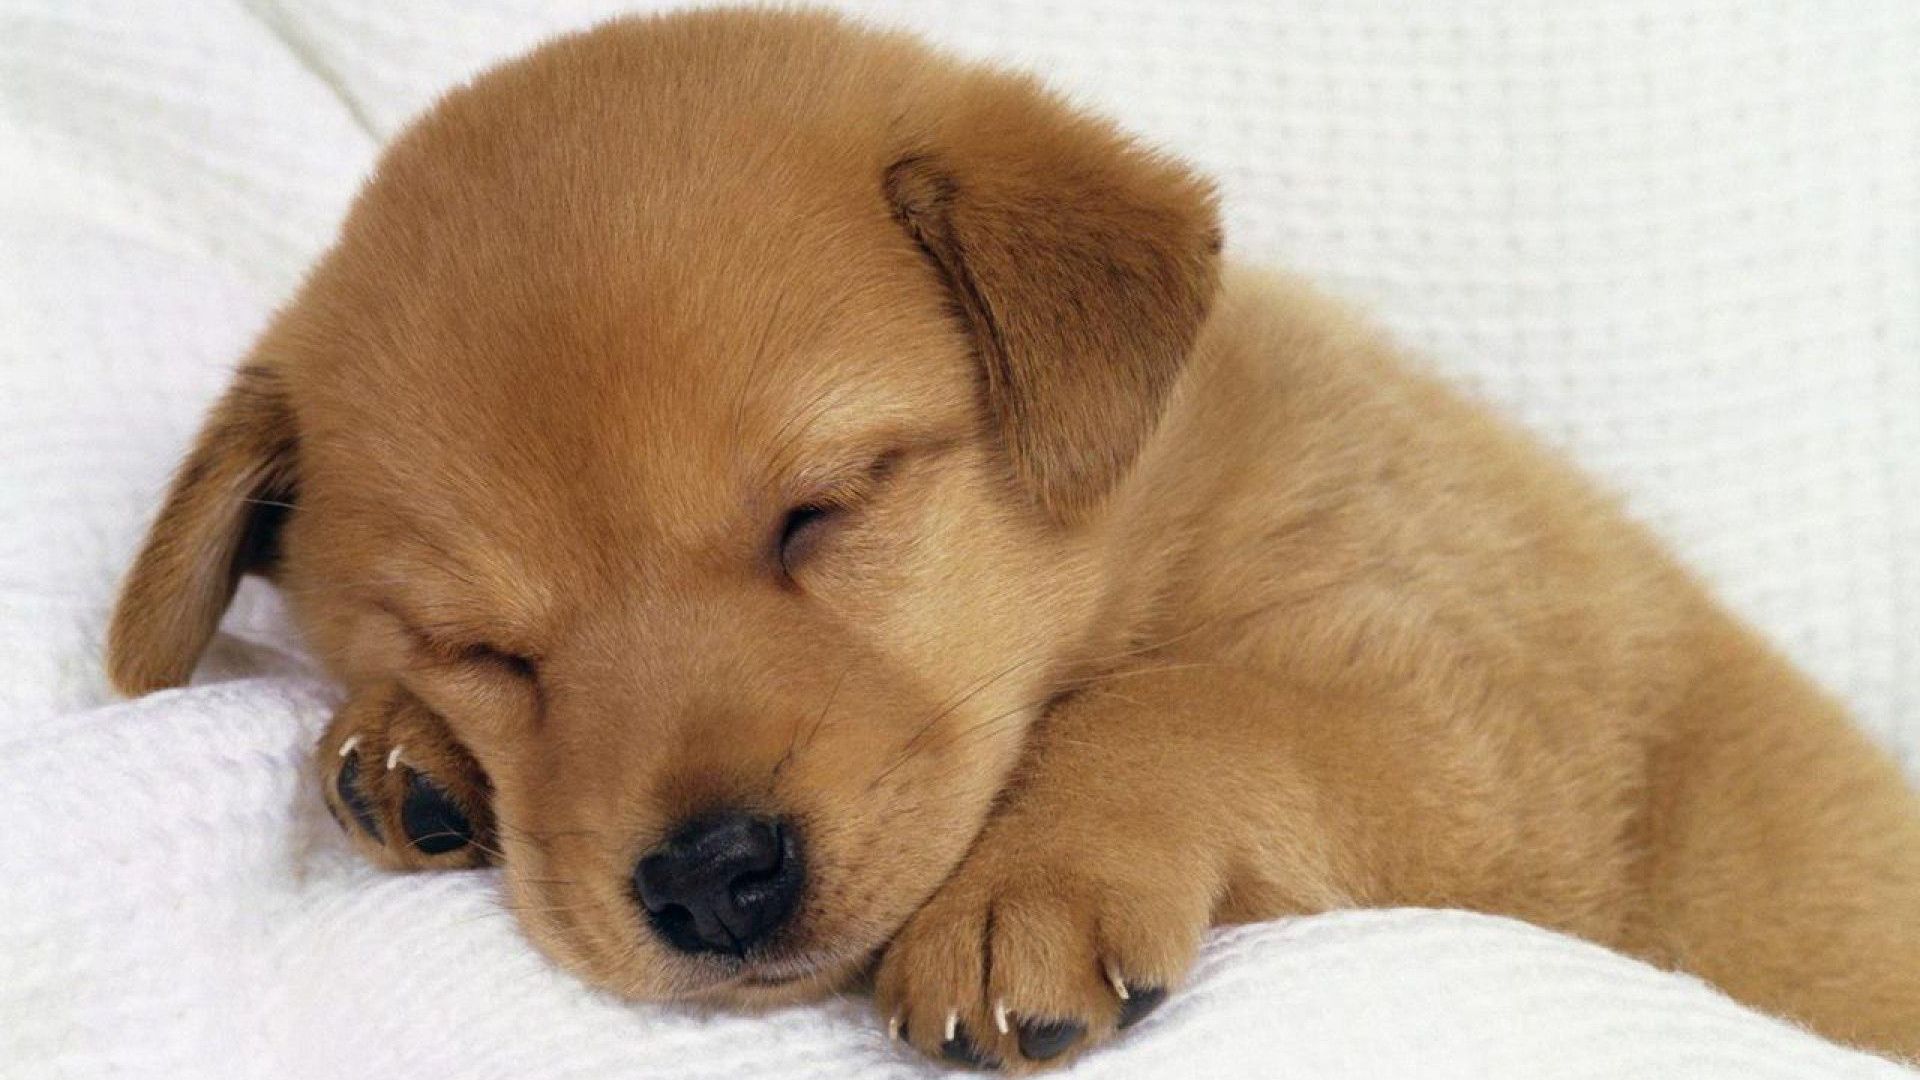 Free download Cute Dog Wallpaper 8694 HD Wallpaper in Animals Imagecicom [1920x1230] for your Desktop, Mobile & Tablet. Explore Cute Pet Wallpaper. Cute Puppies and Dogs Wallpaper, Adorable Puppy